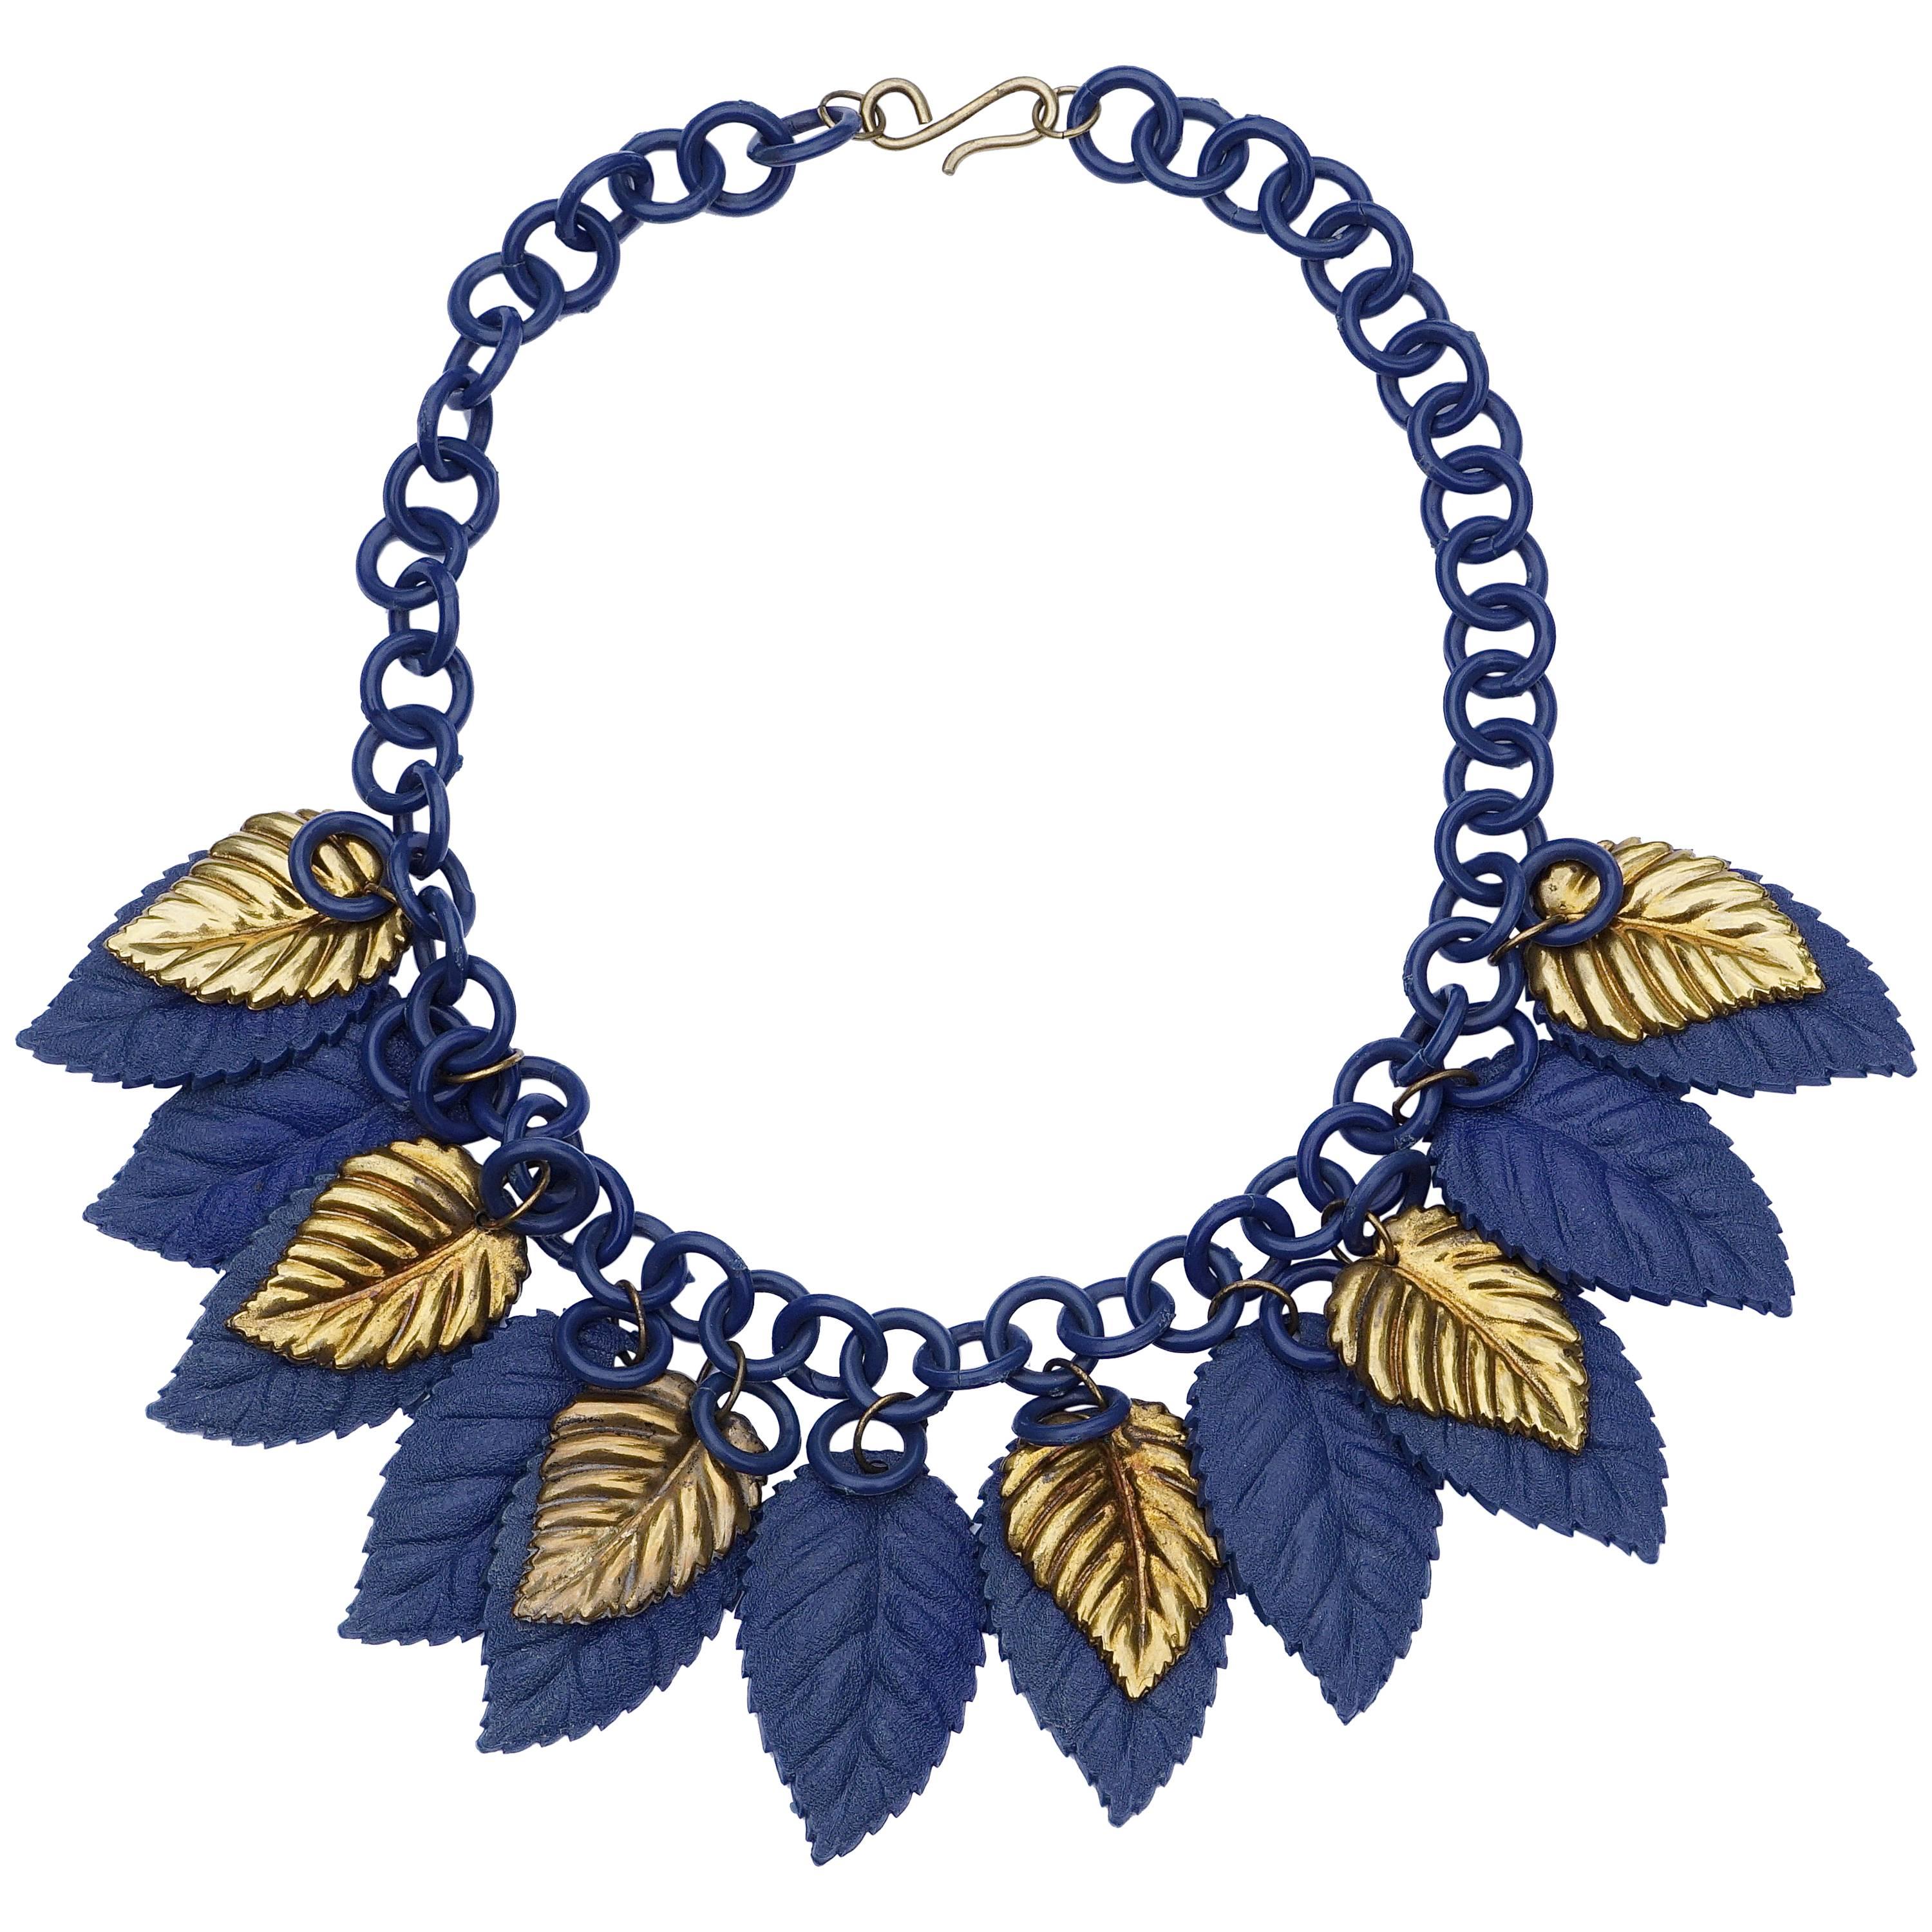 Blue Celluloid and Gold Tone Metal Leaf Necklace circa 1930s For Sale